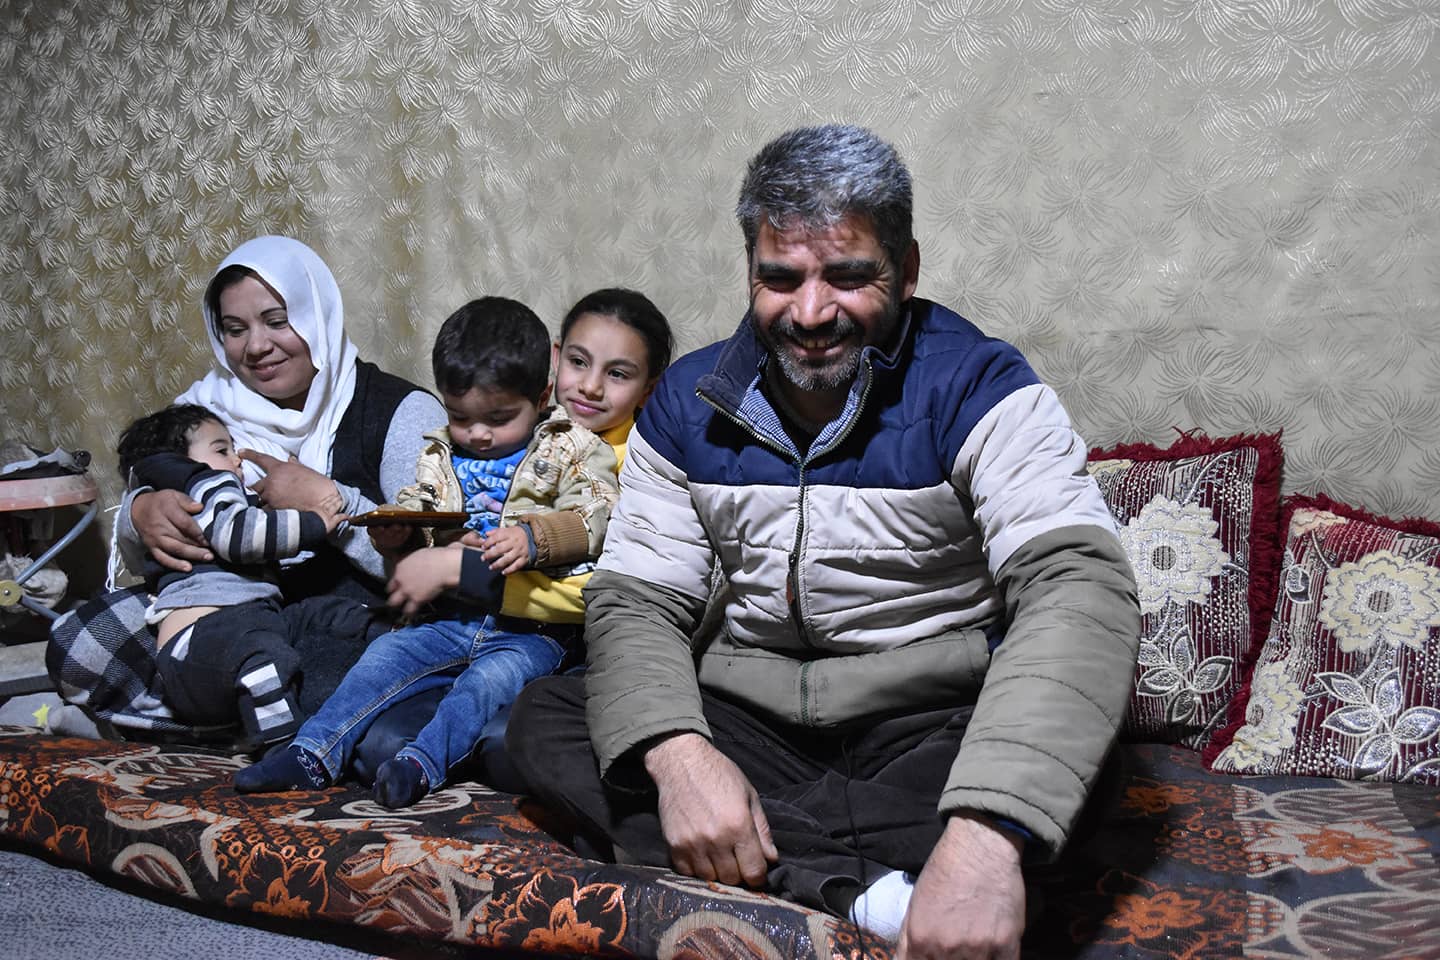 Hamid and his family sit indoors on a mattress.